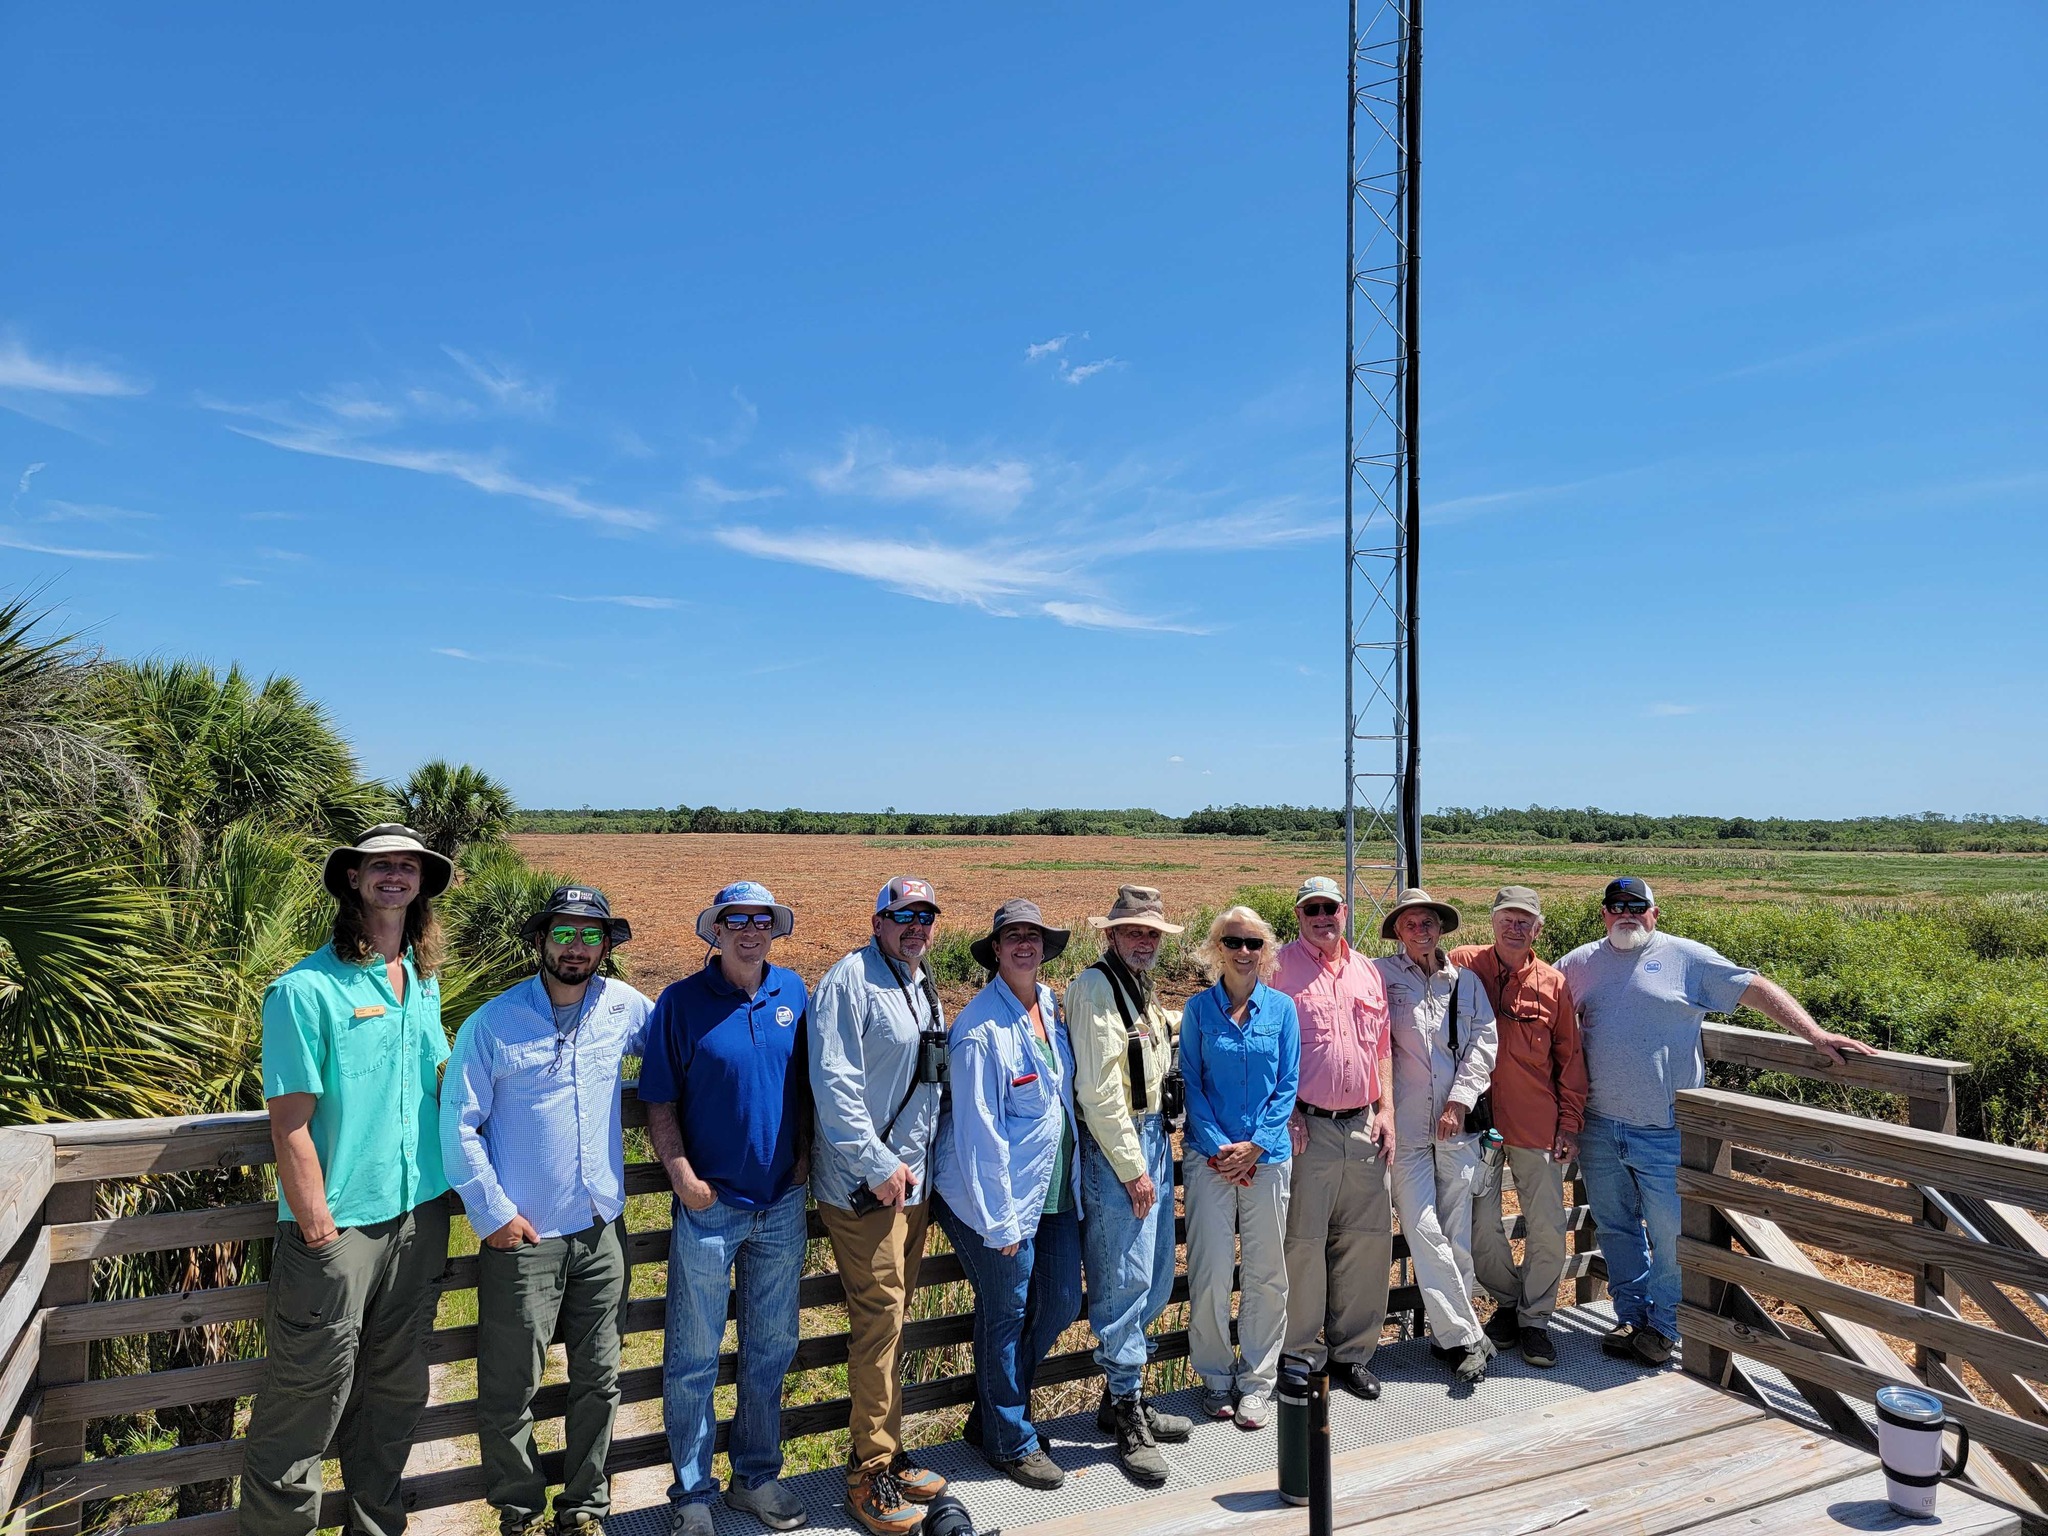 A group of people standing on a platform with blue sky and an antenna